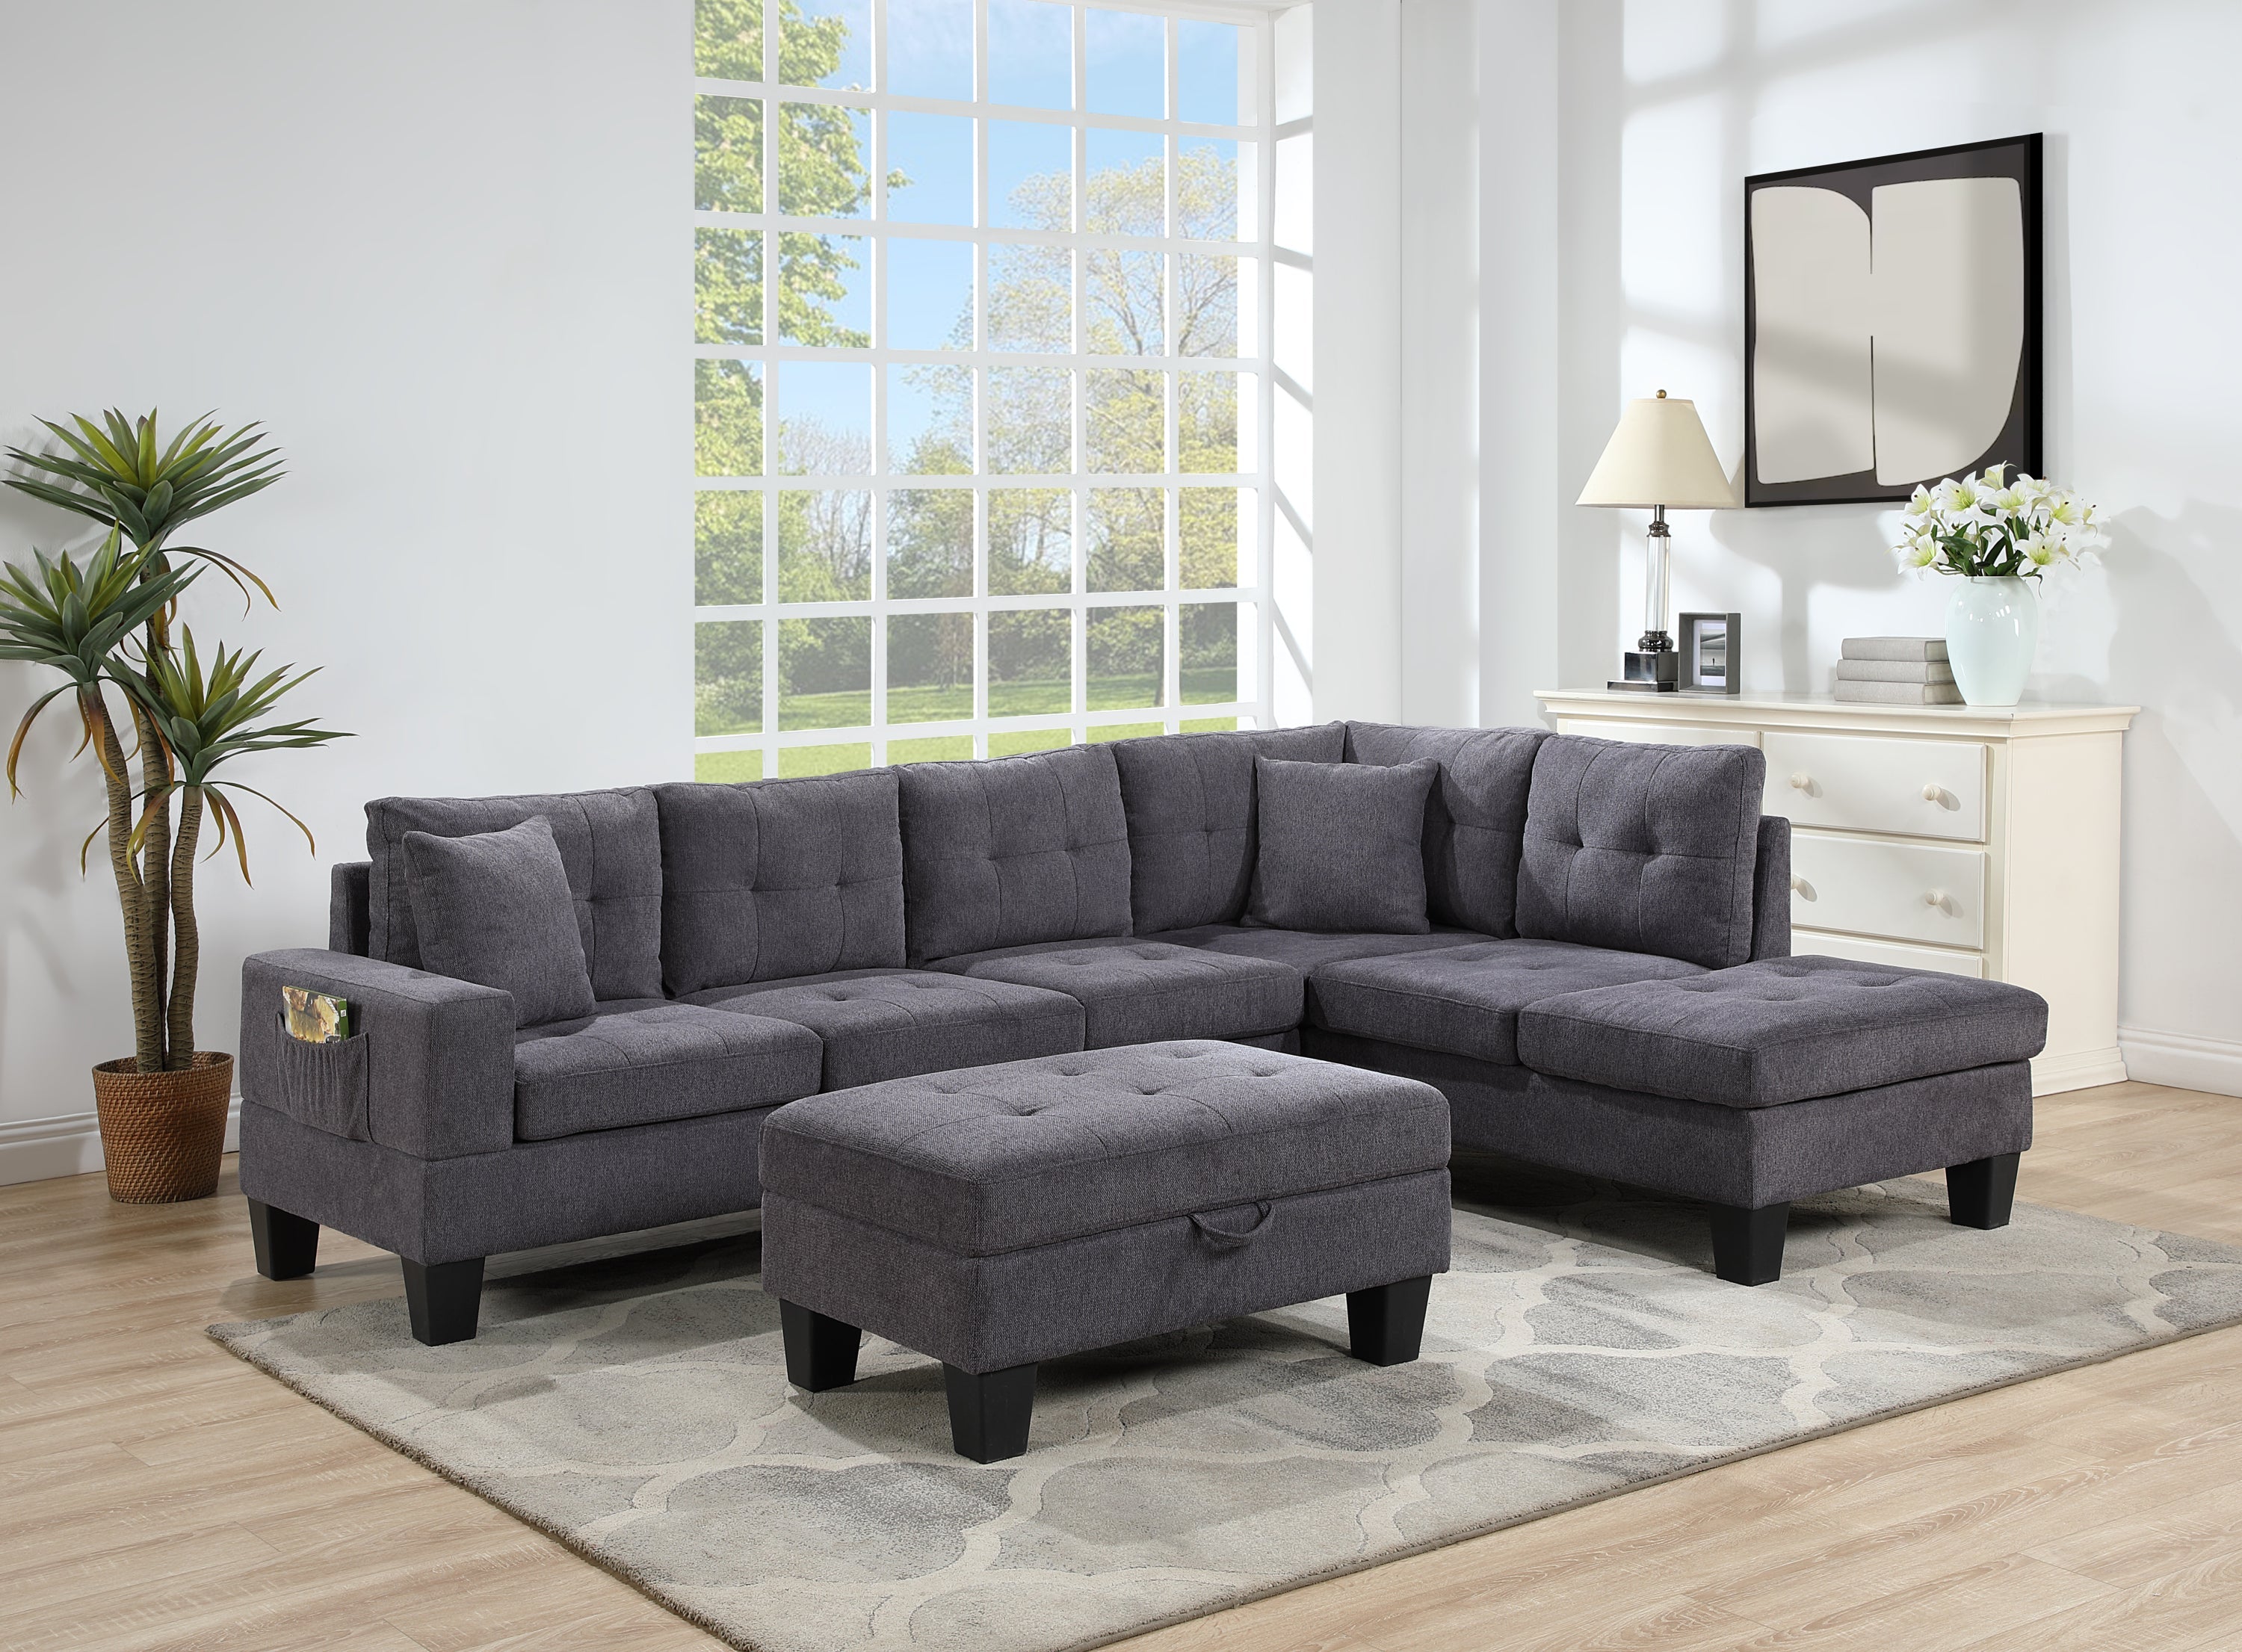 Briscoe 102" Reversible Sectional Sofa w/ Table, Charging, Storage | Dark Gray-Stationary Sectionals-American Furniture Outlet